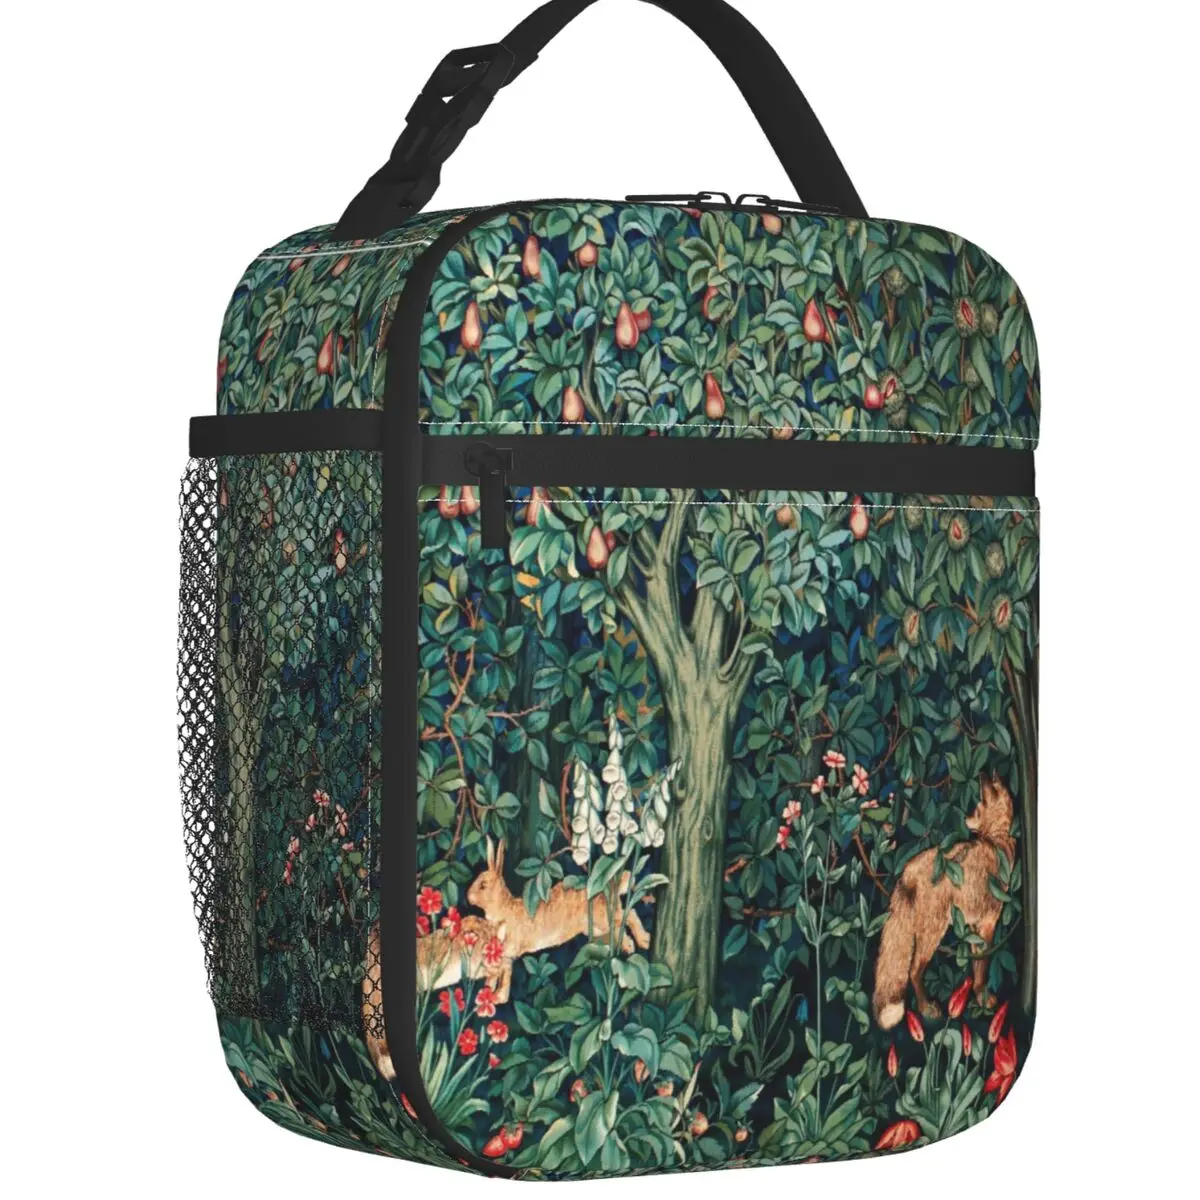 

Fox And Hares By William Morris Insulated Lunch Bags Floral Textile Pattern Portable Thermal Cooler Food Lunch Box Kids School